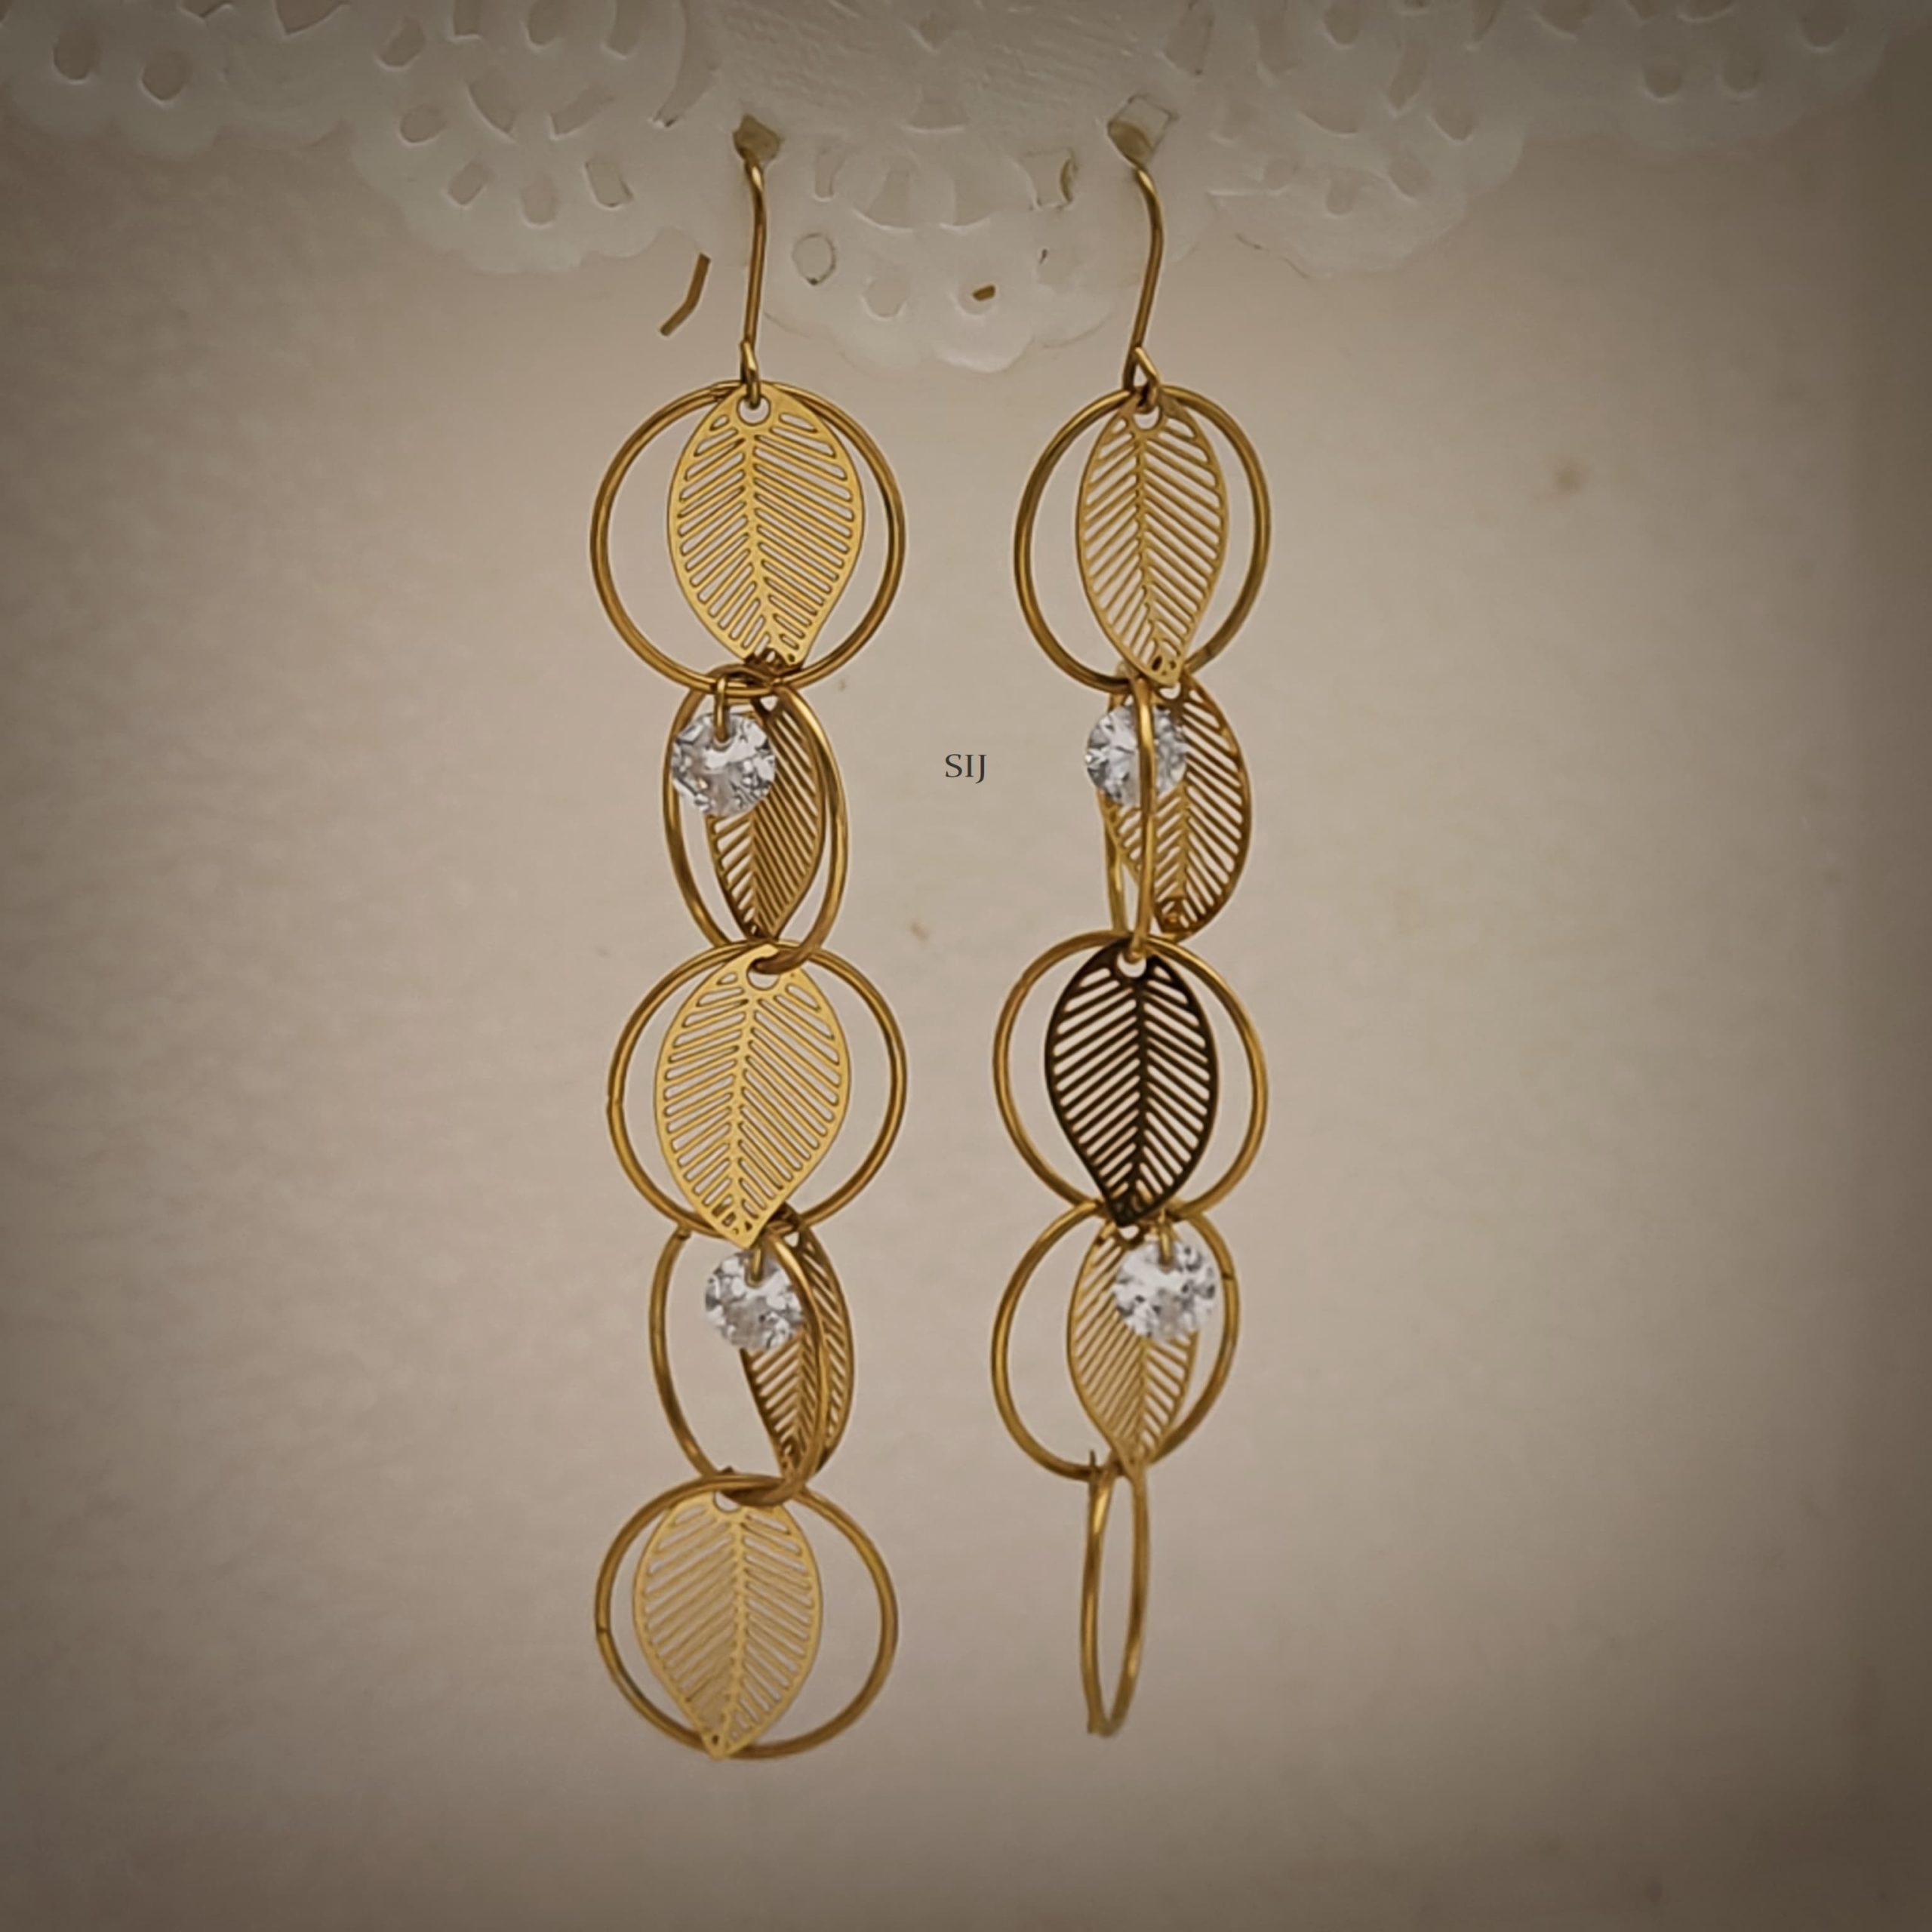 Gold Plated Circular Dangler Earrings with Leaf Design